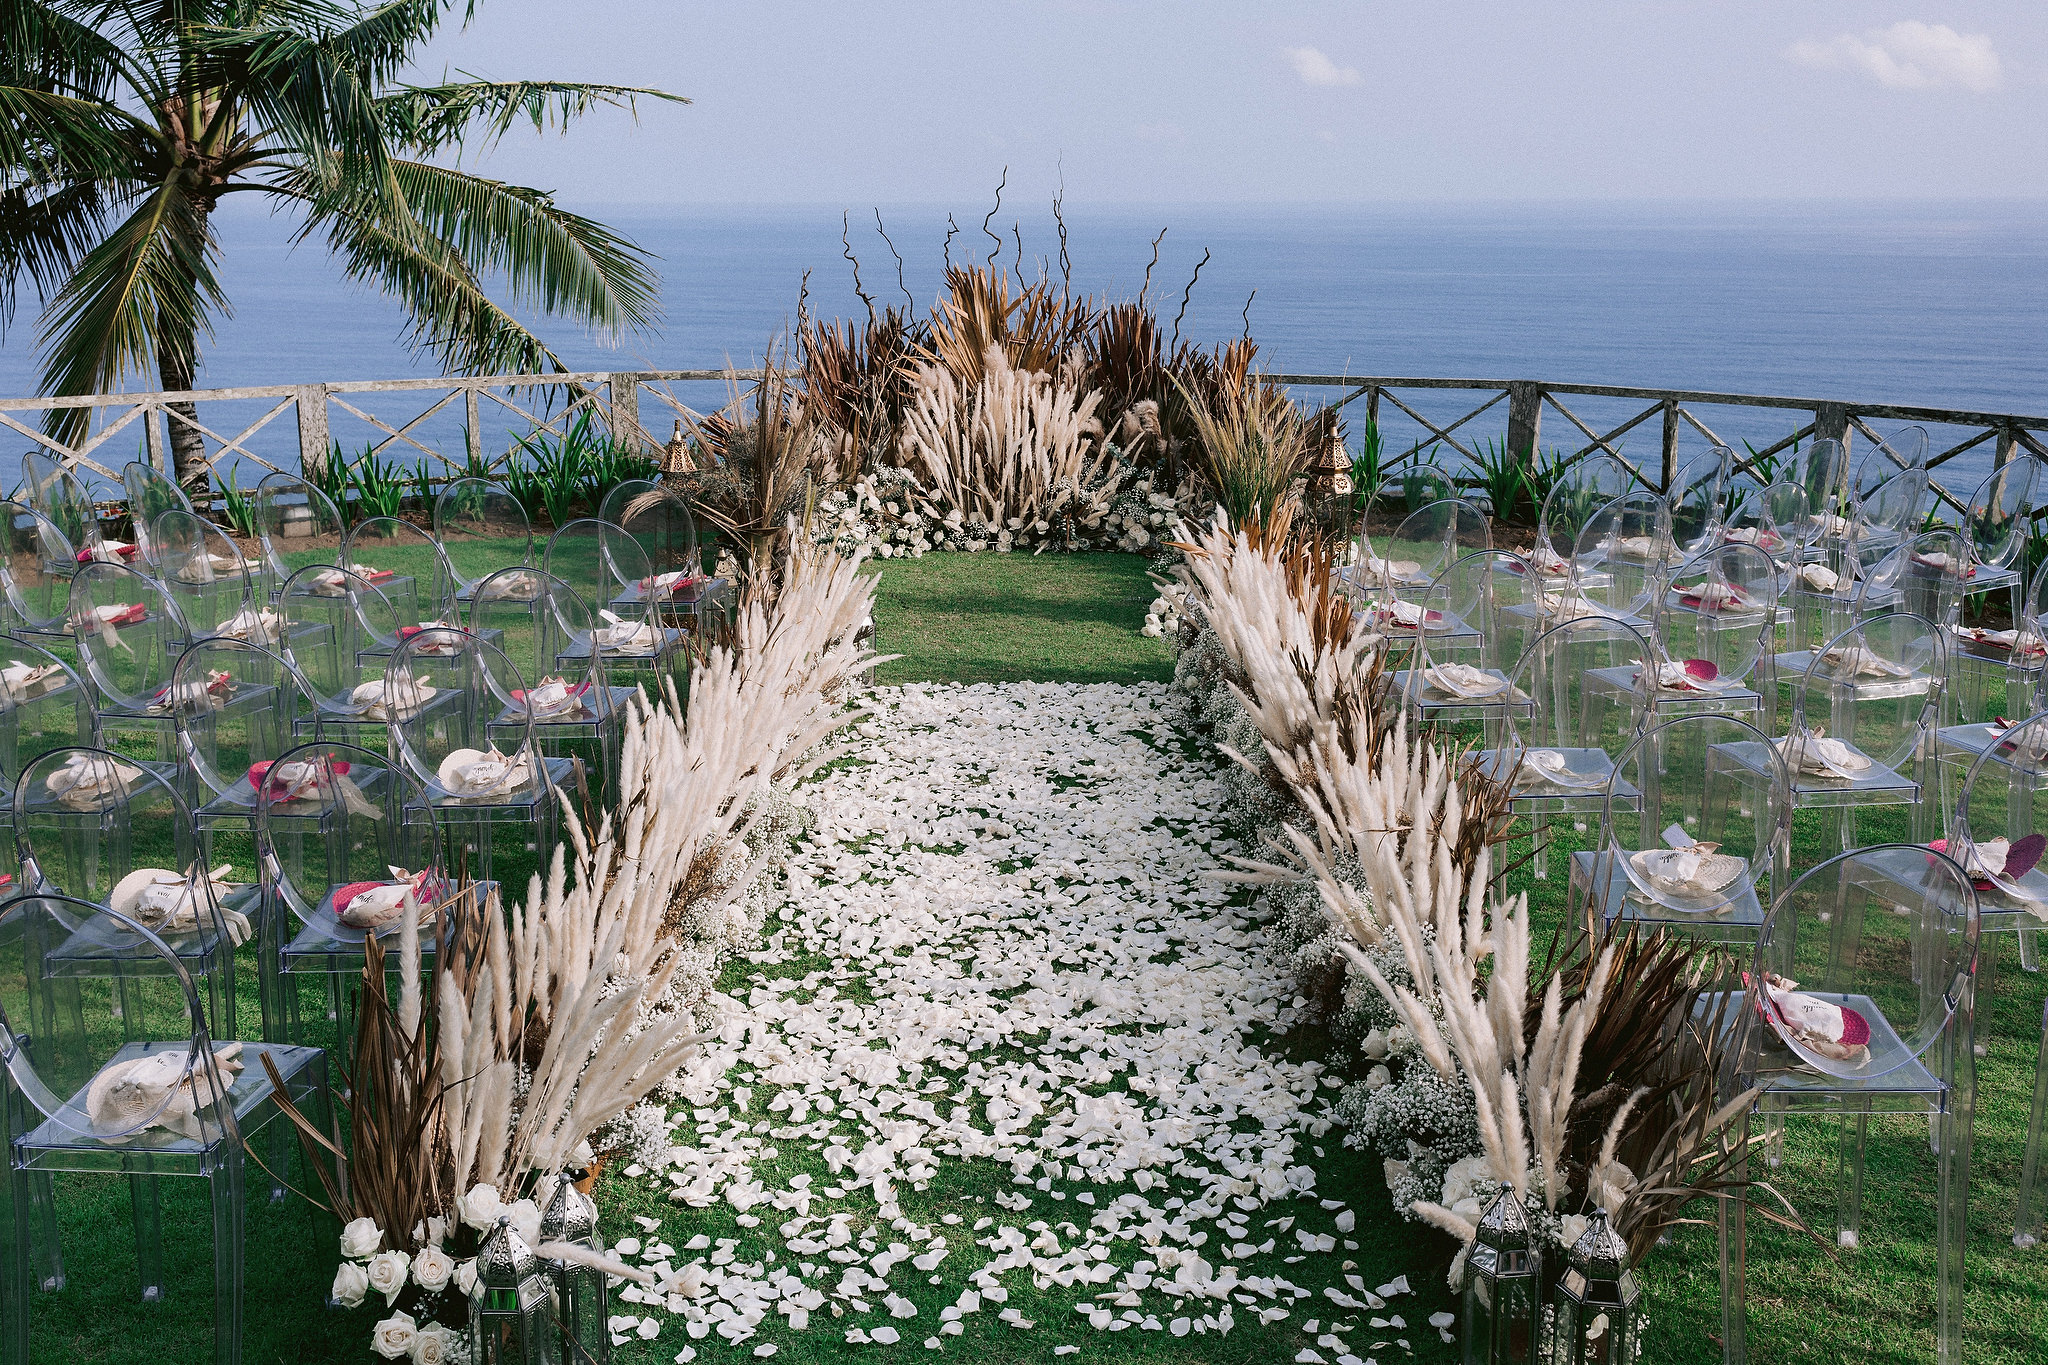 A beautiful ceremony set-up overlooking the ocean at Bali, Indonesia. Destination wedding photo by Jenny Fu Studio